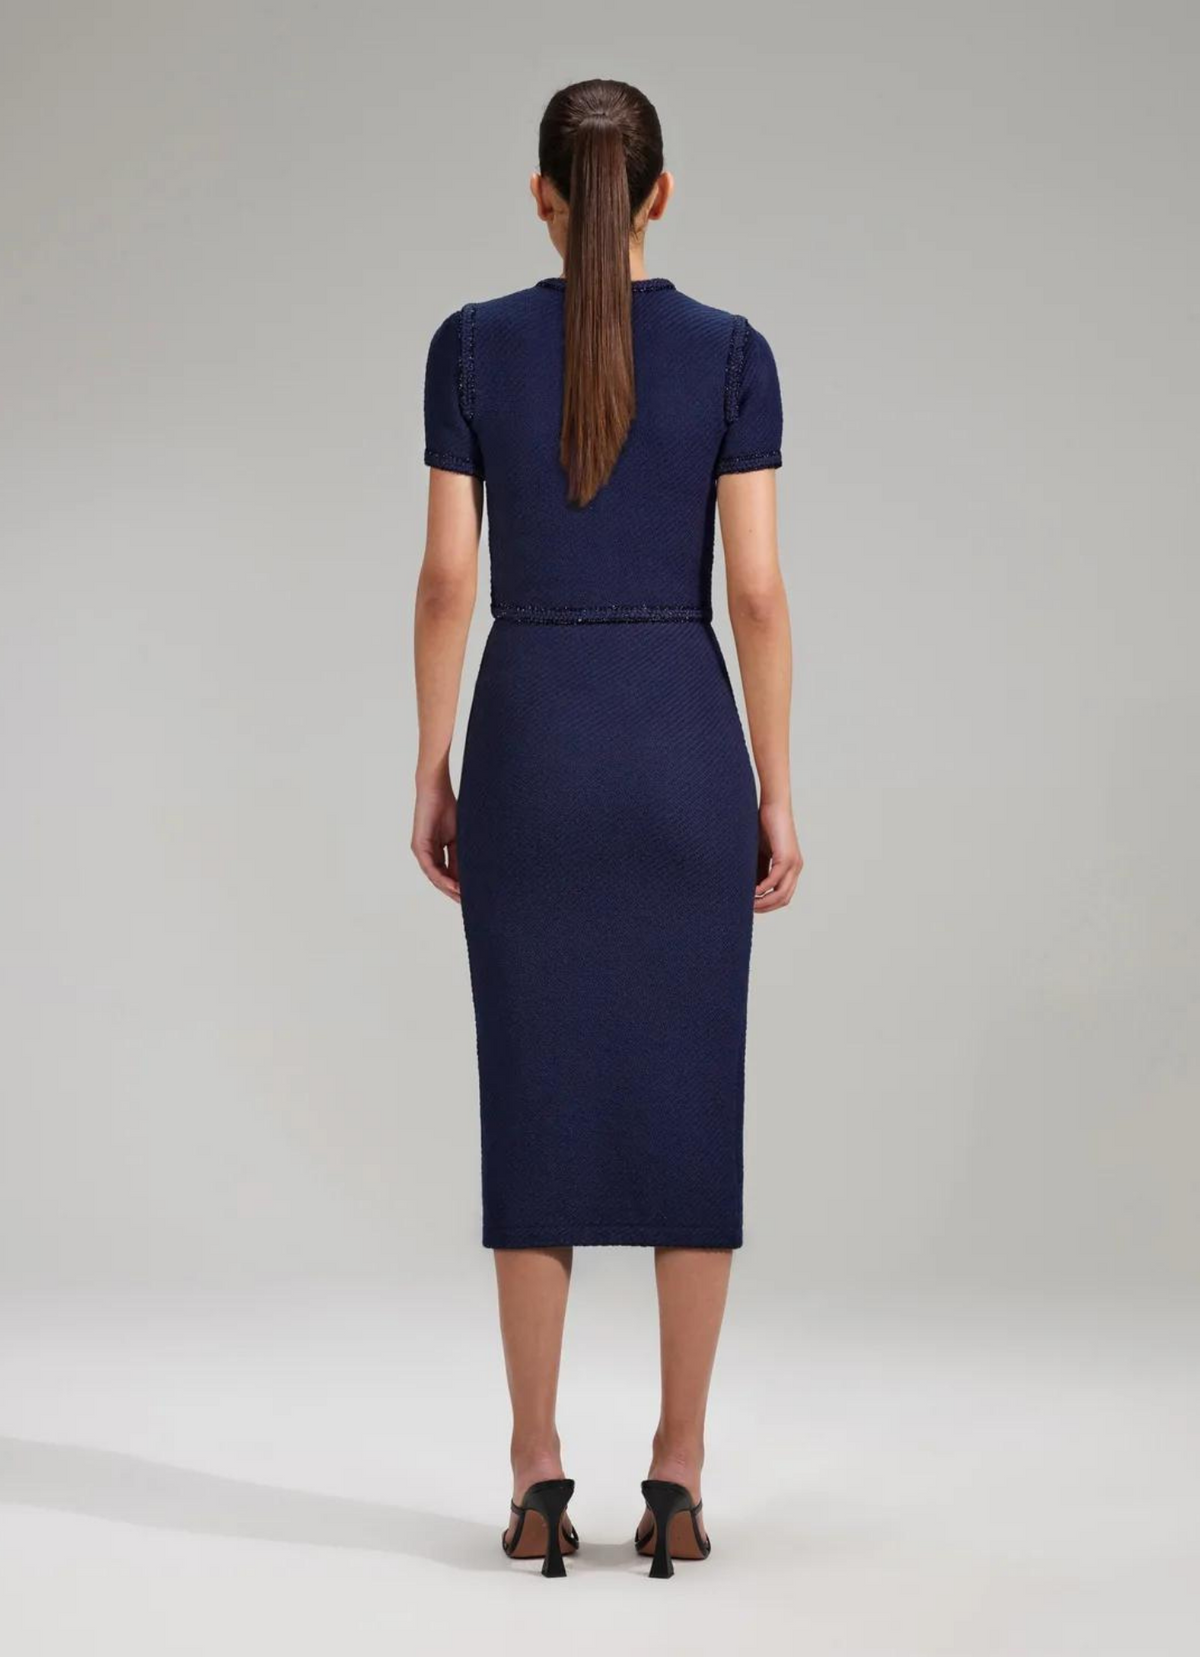 Midi navy knitted pull on skirt with two patch pockets and diamanté press stud buttons